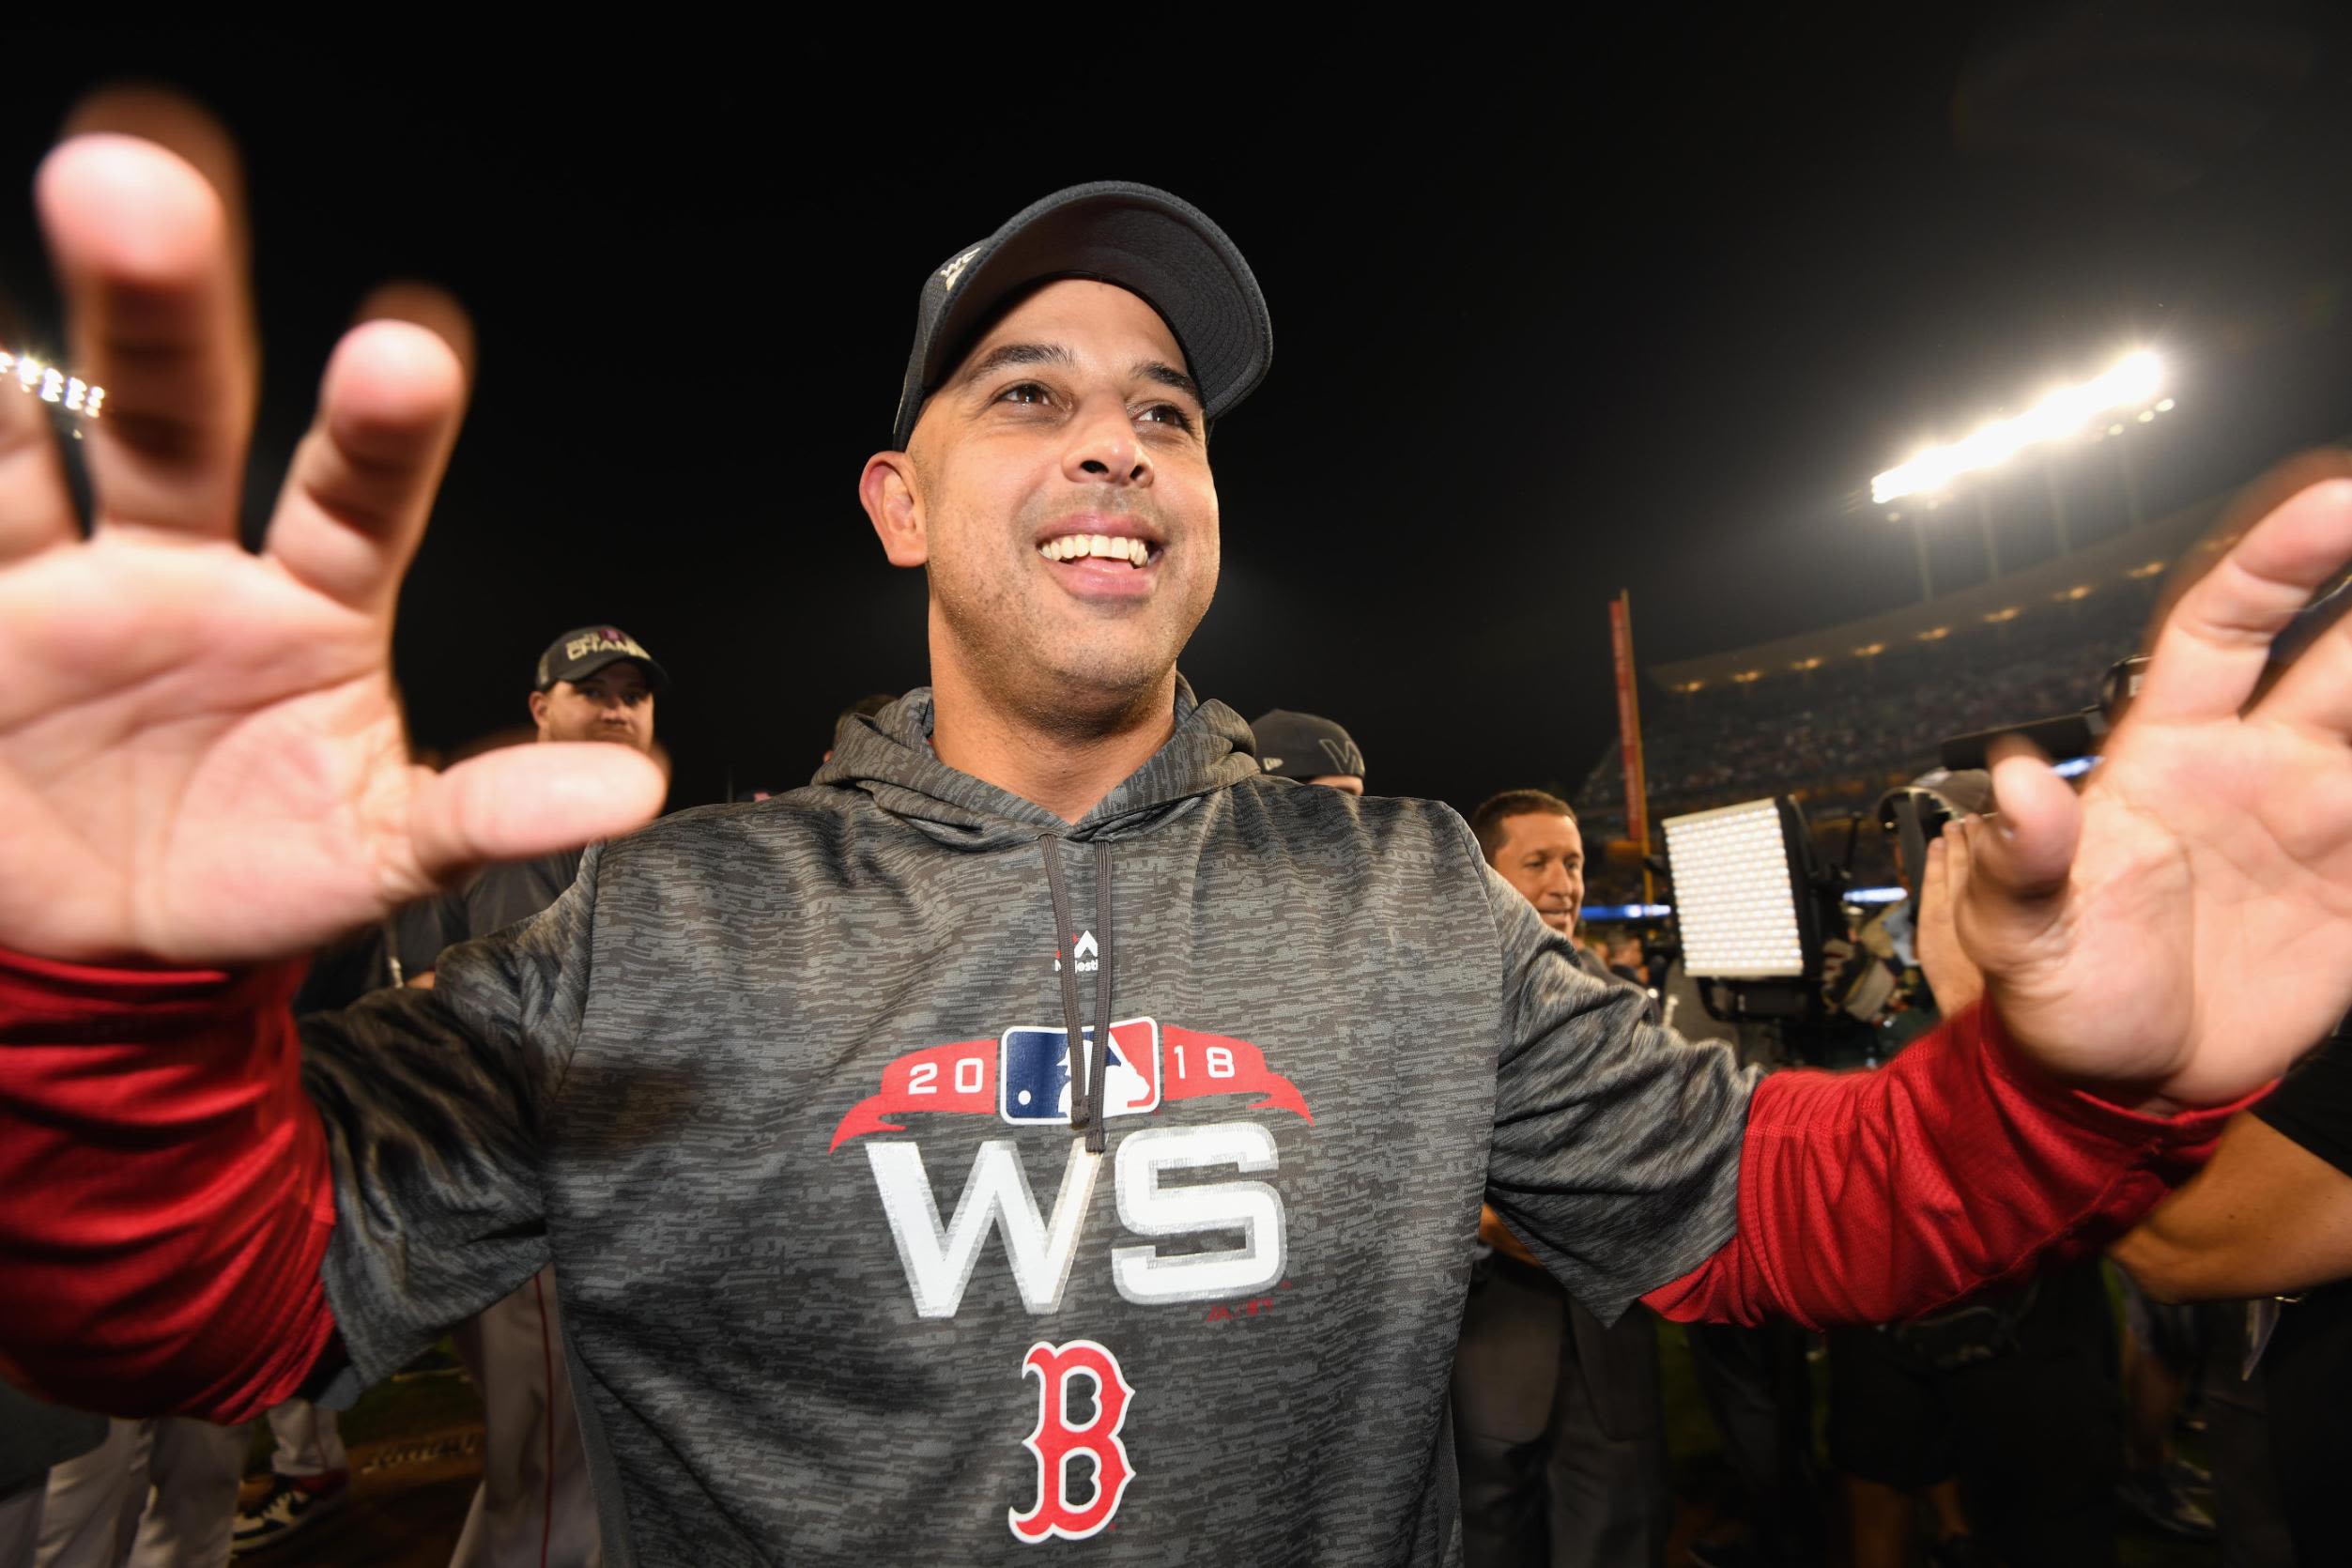 Red Sox's Alex Cora, implicated in MLB report on Astros' cheating